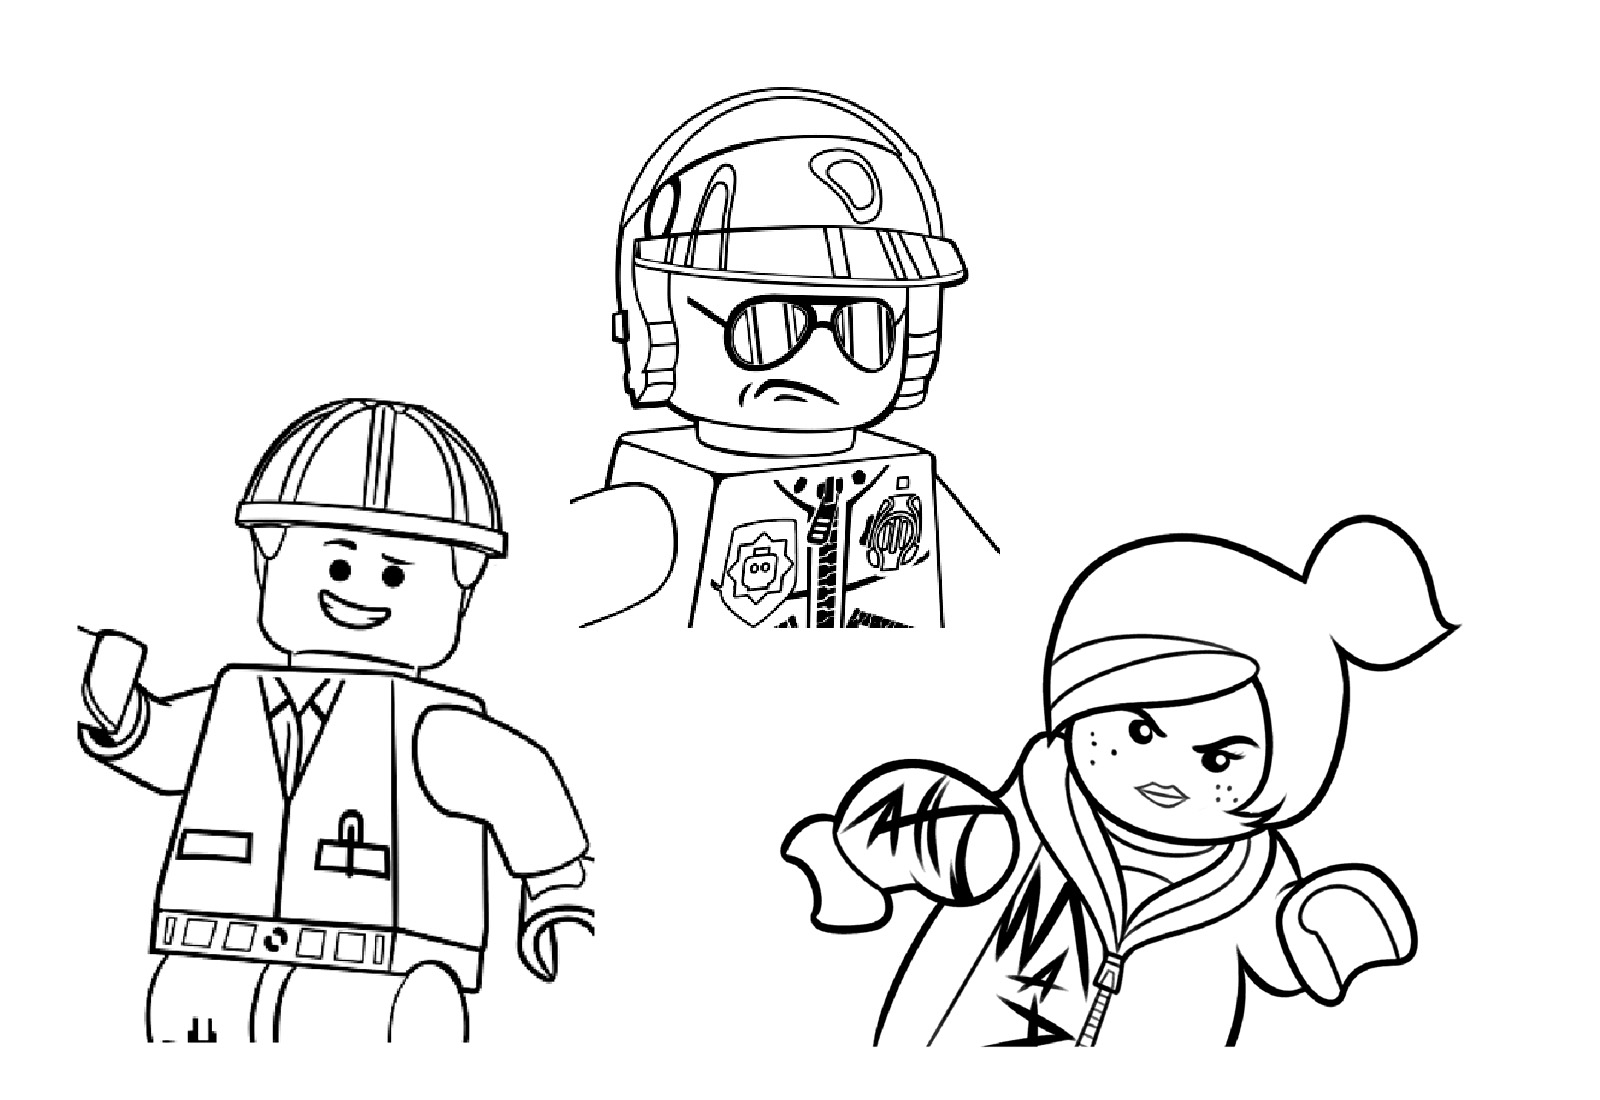 Montage of 3 characters from the Lego Movie, on a white background